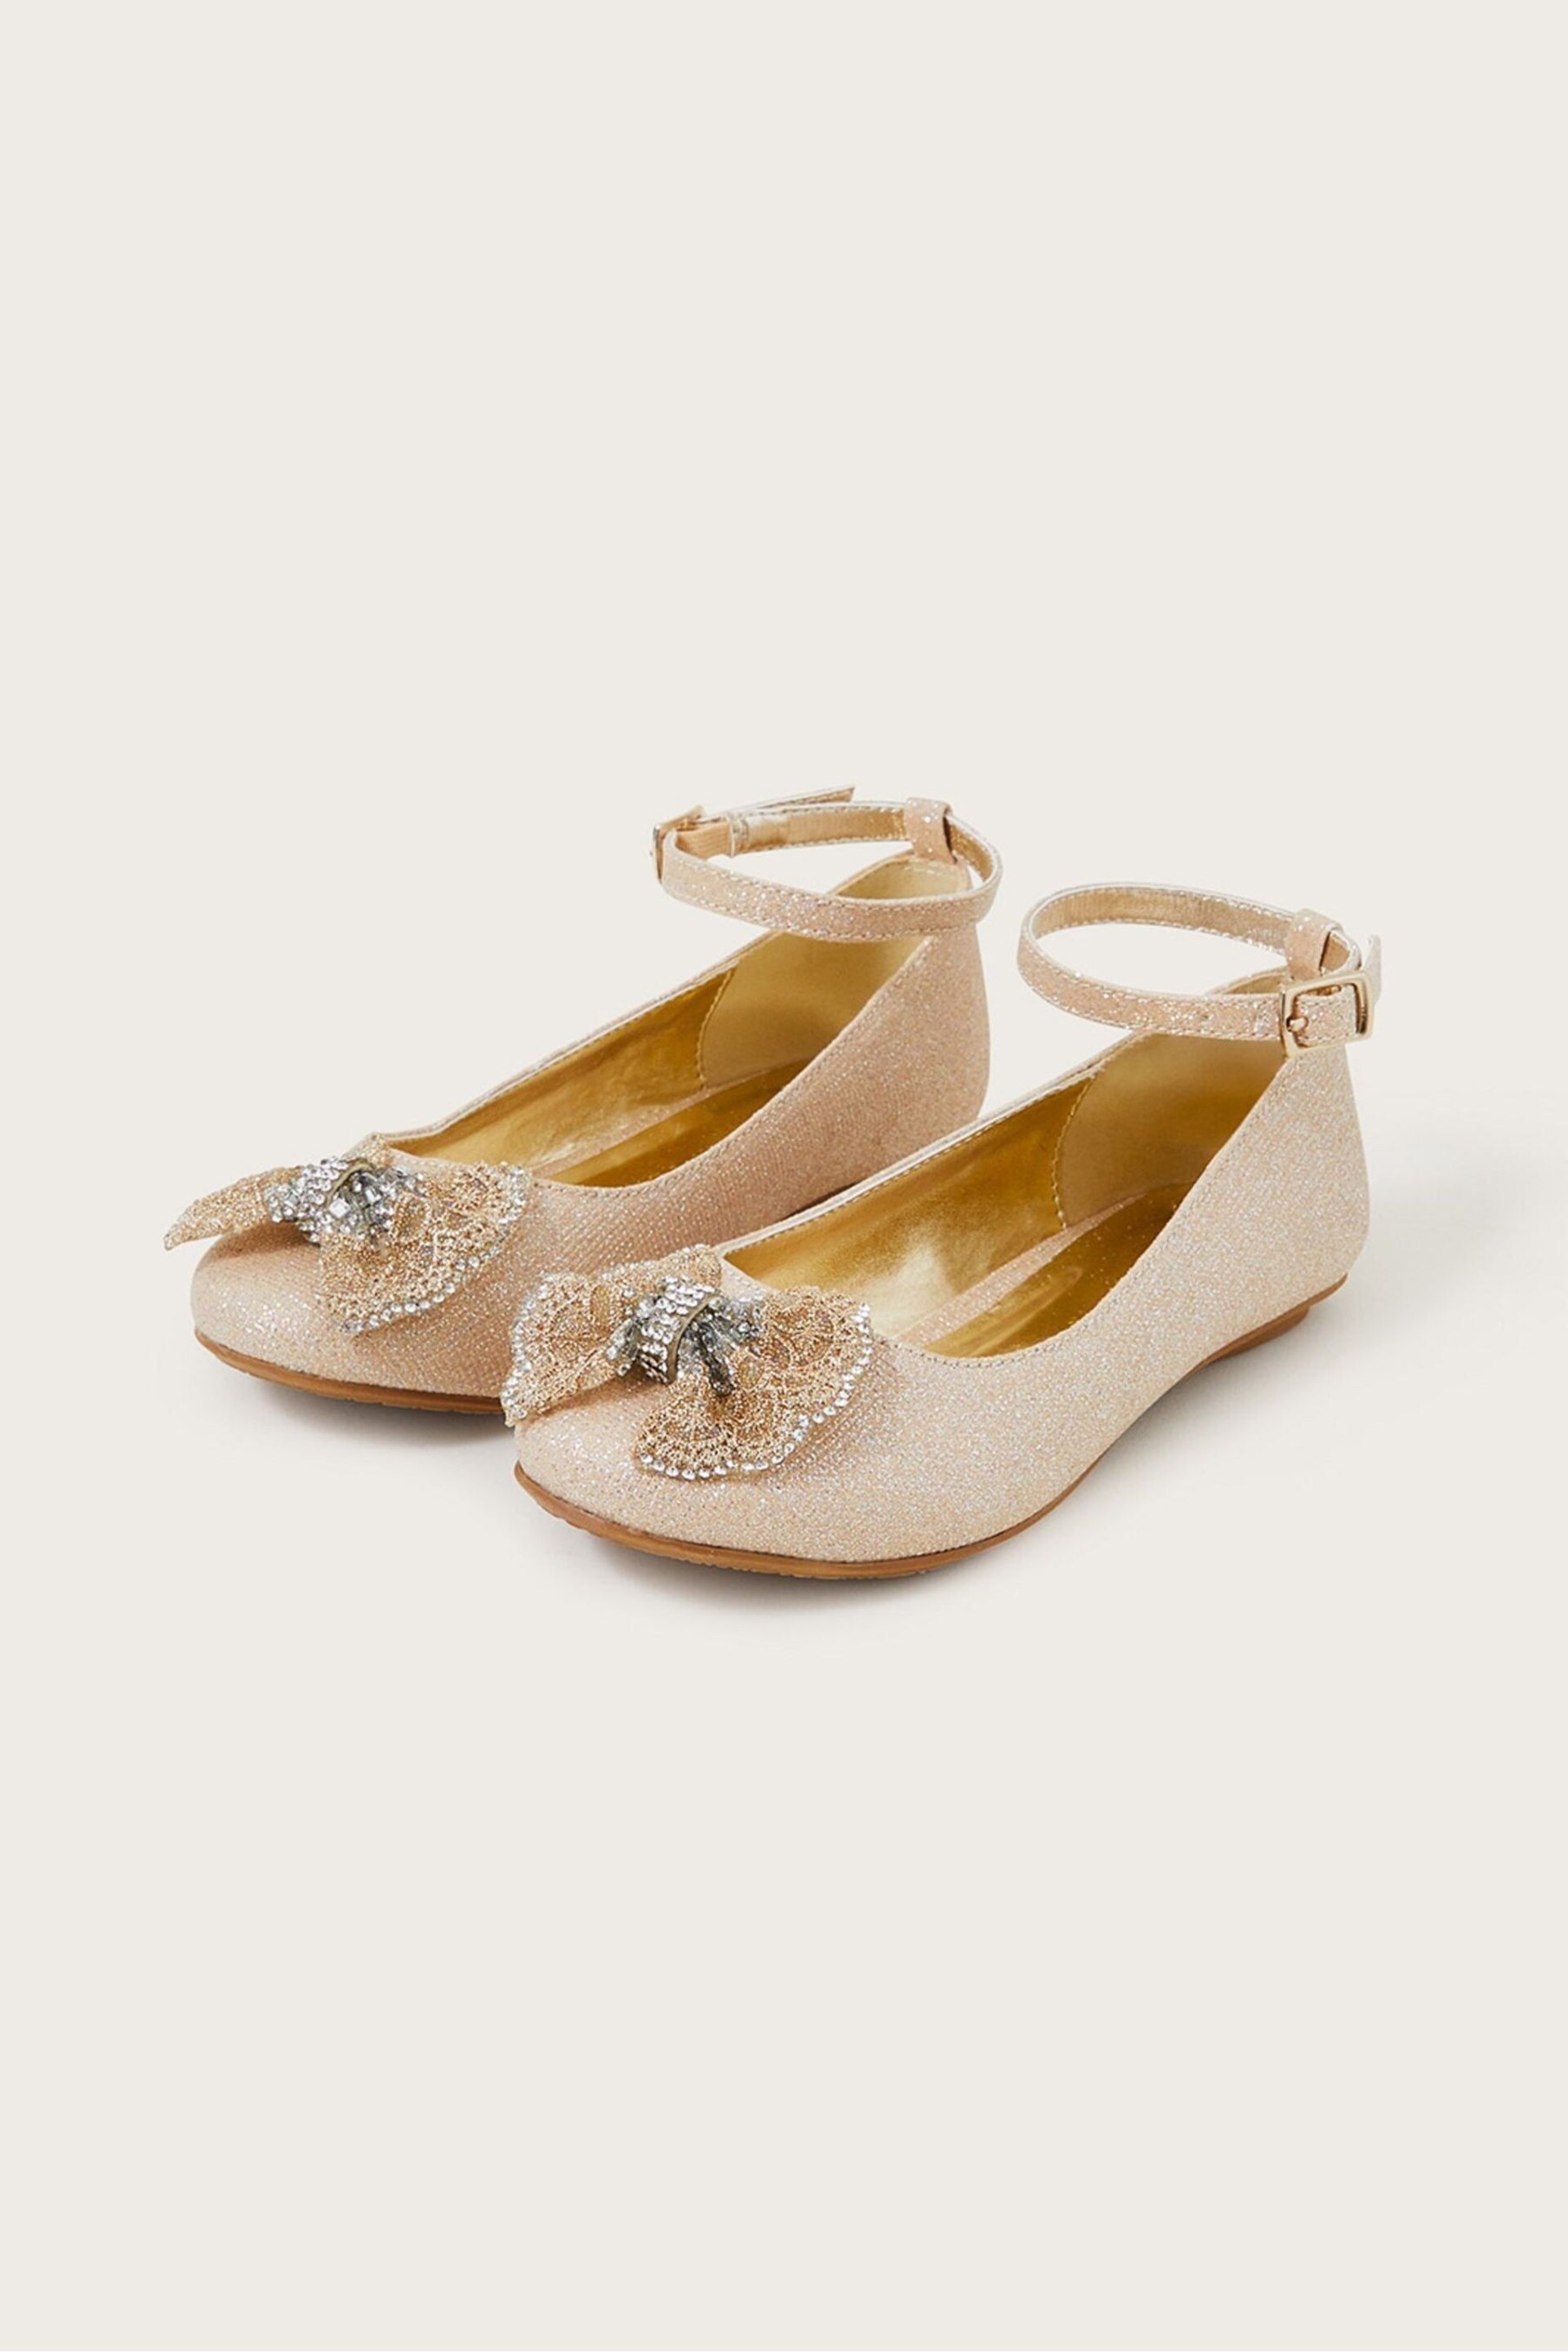 Monsoon Gold Polly Shimmer Bow Ballerina Flats - Image 2 of 3